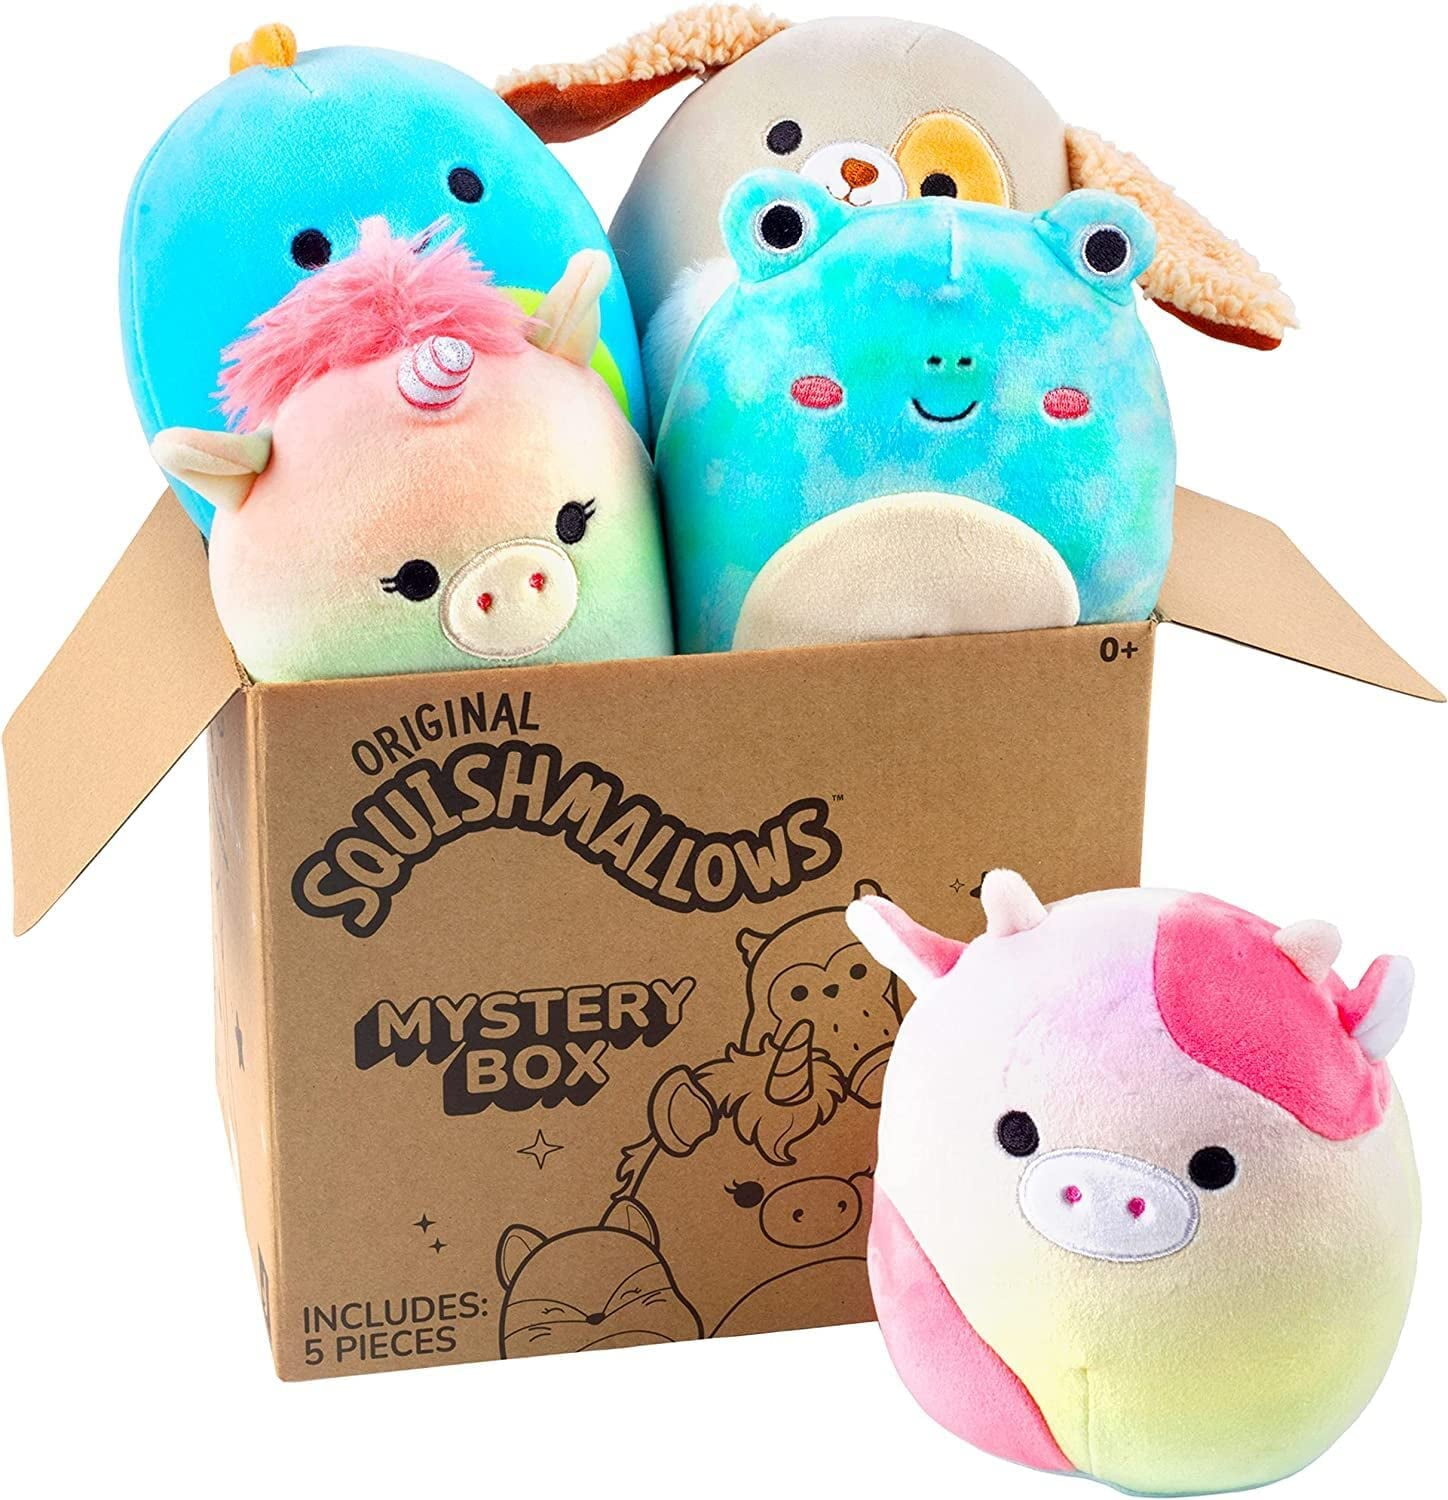 Squishmallow 5" Plush Mystery Box, 5-Pack - Assorted Set of Various Styles - Official Kellytoy - Cute and Soft Squishy Stuffed Animal Toy - image 1 of 5